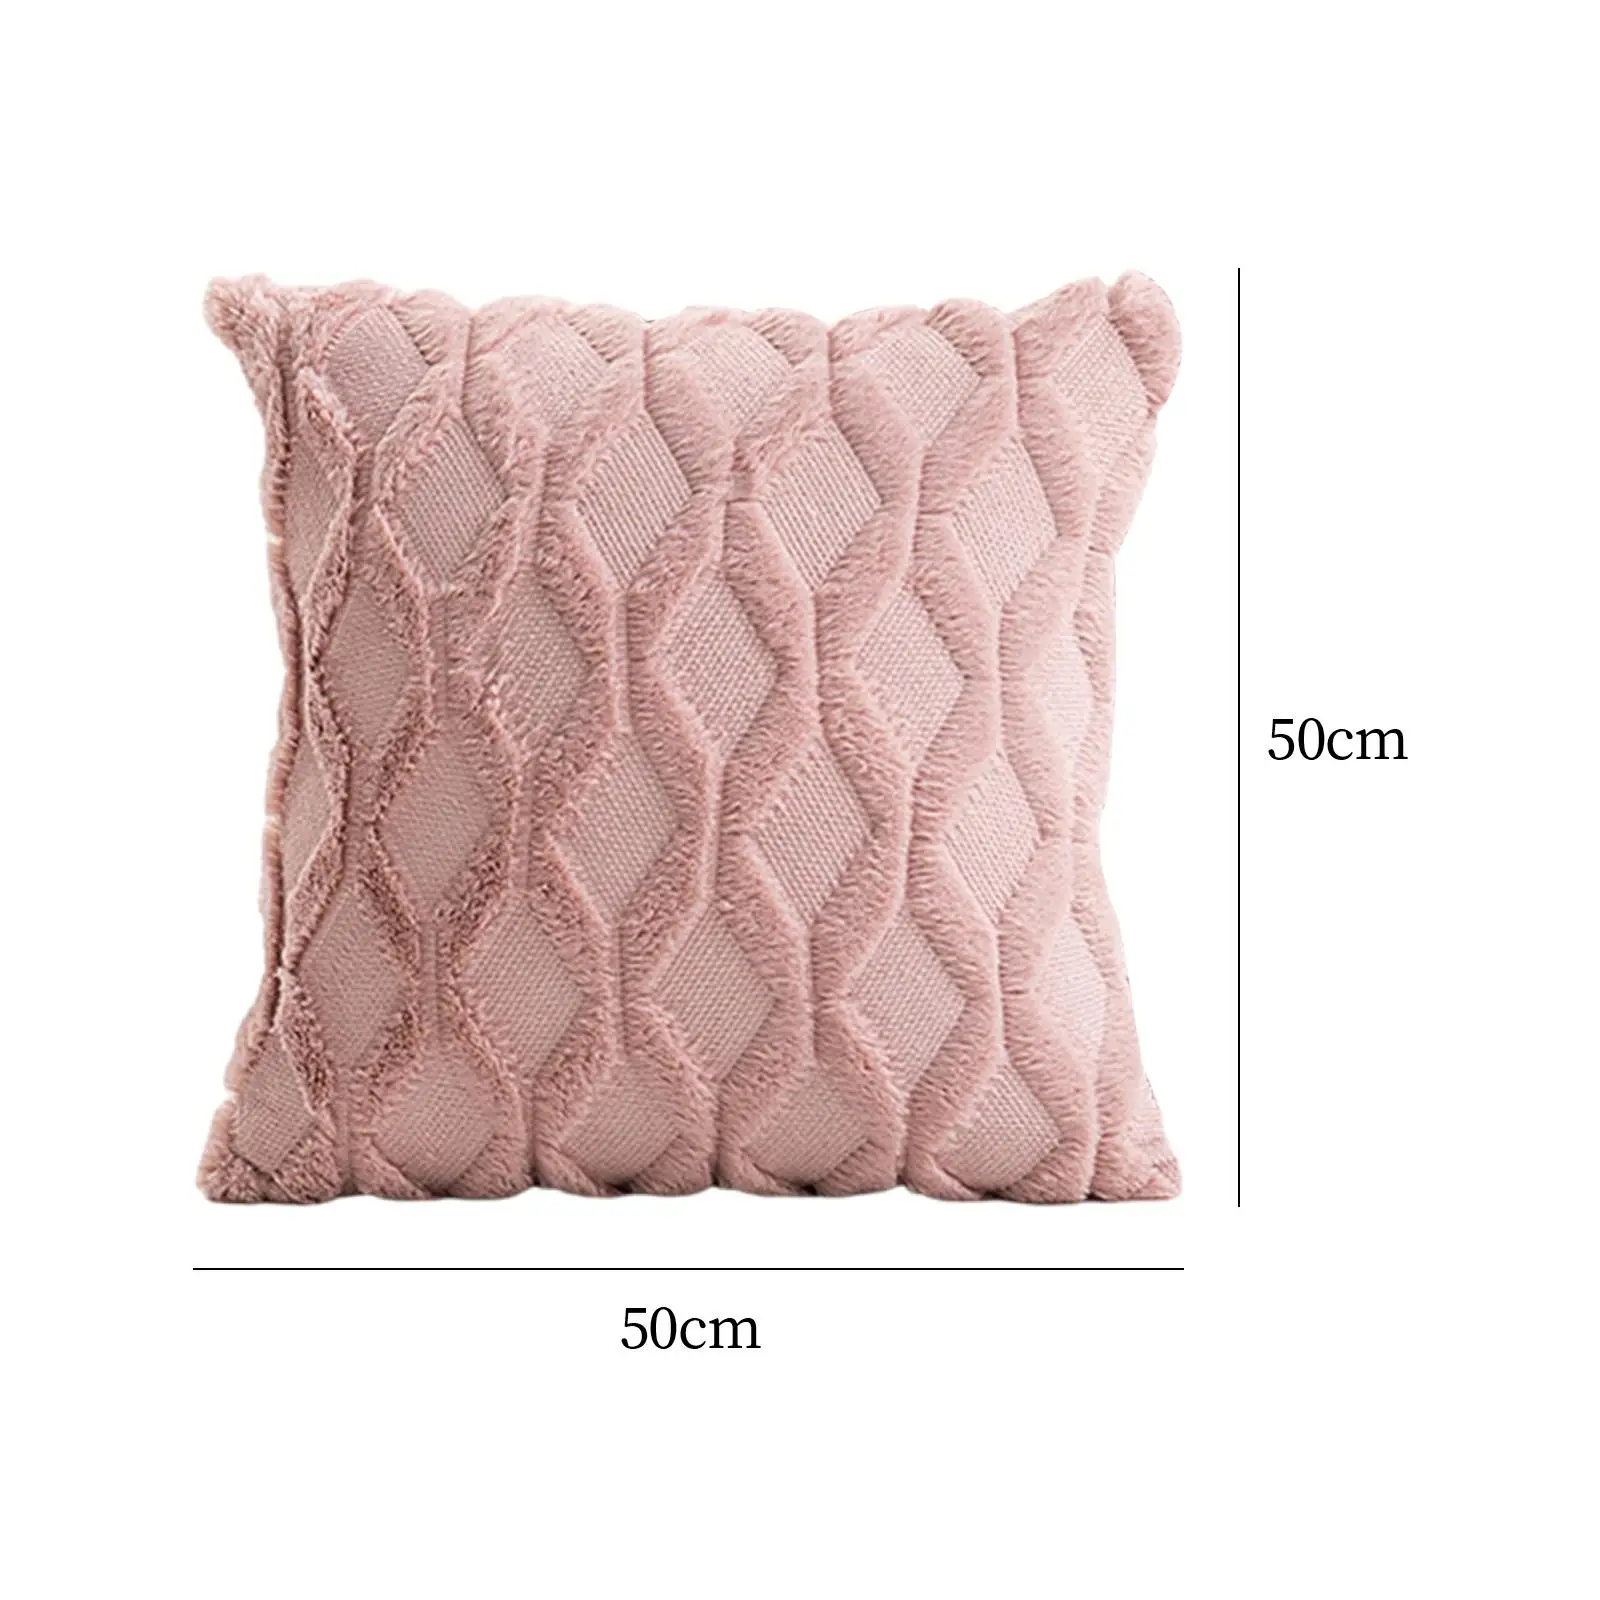 Shaggy Throw Pillow Case Handmade Pillowcase for Bed Decorative Gifts